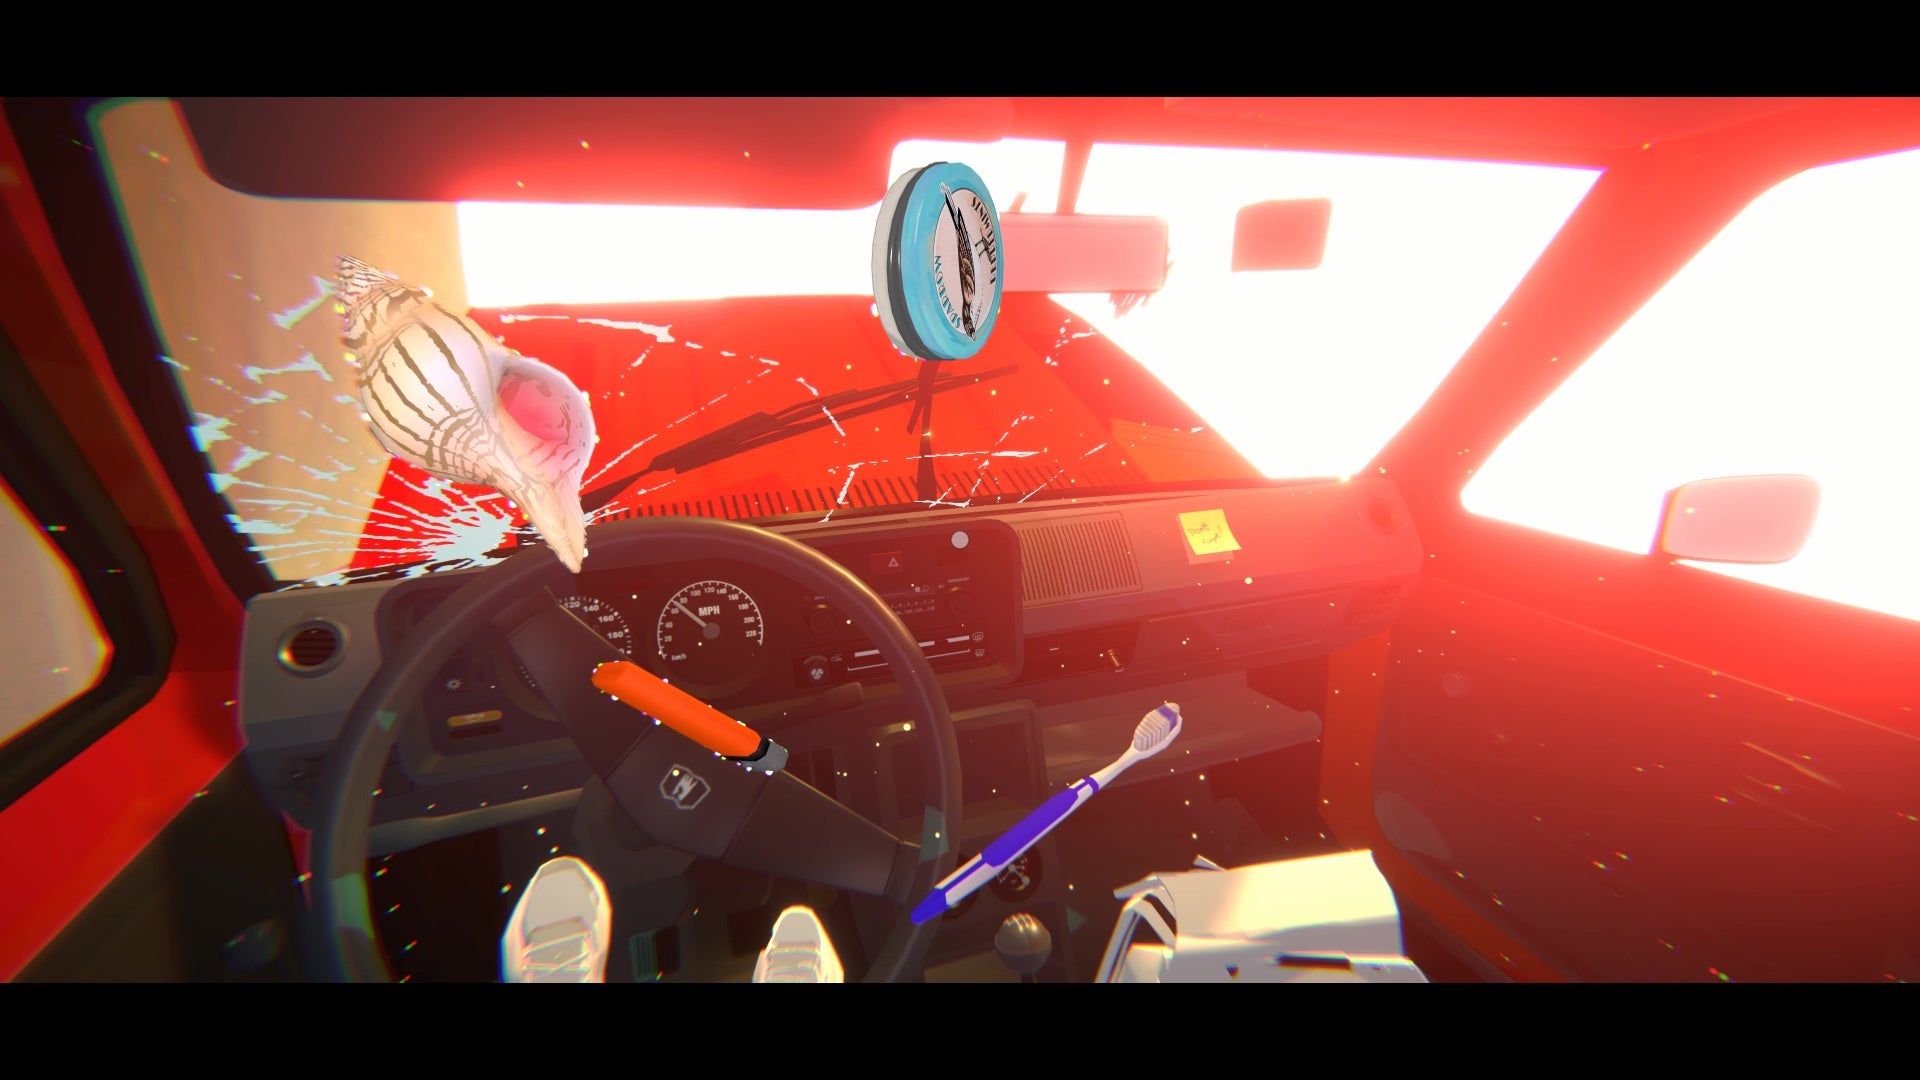 The interior of a car mid-crash, with objects tumbling in front of the driver's face in The Wreck